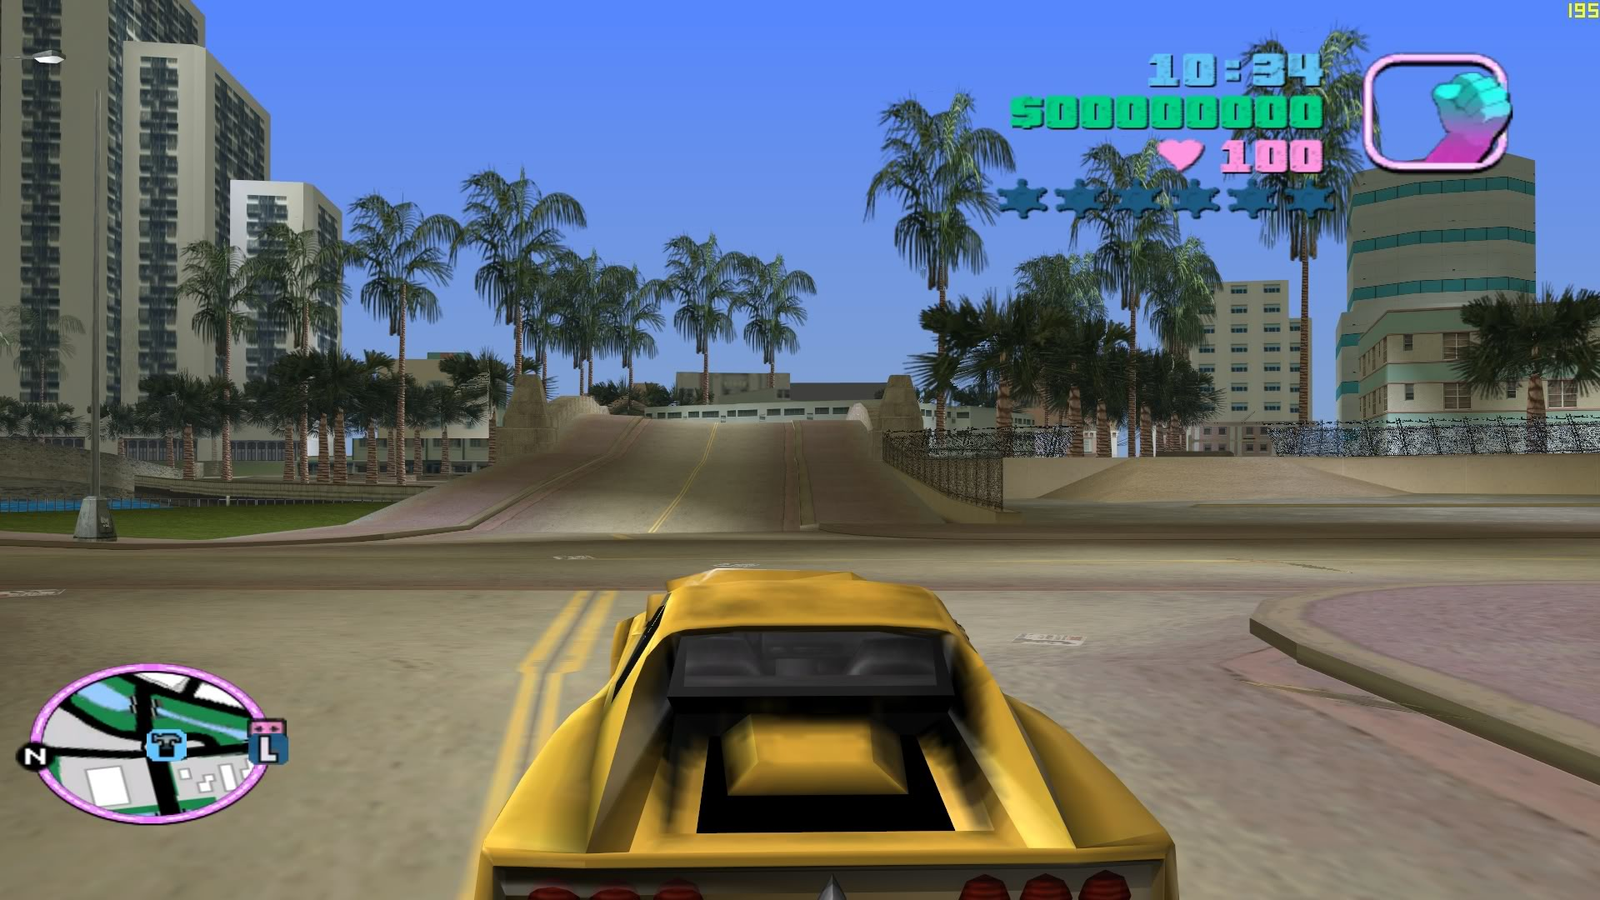 Grand Theft Auto Vice City Multiplayer On PC In 2021